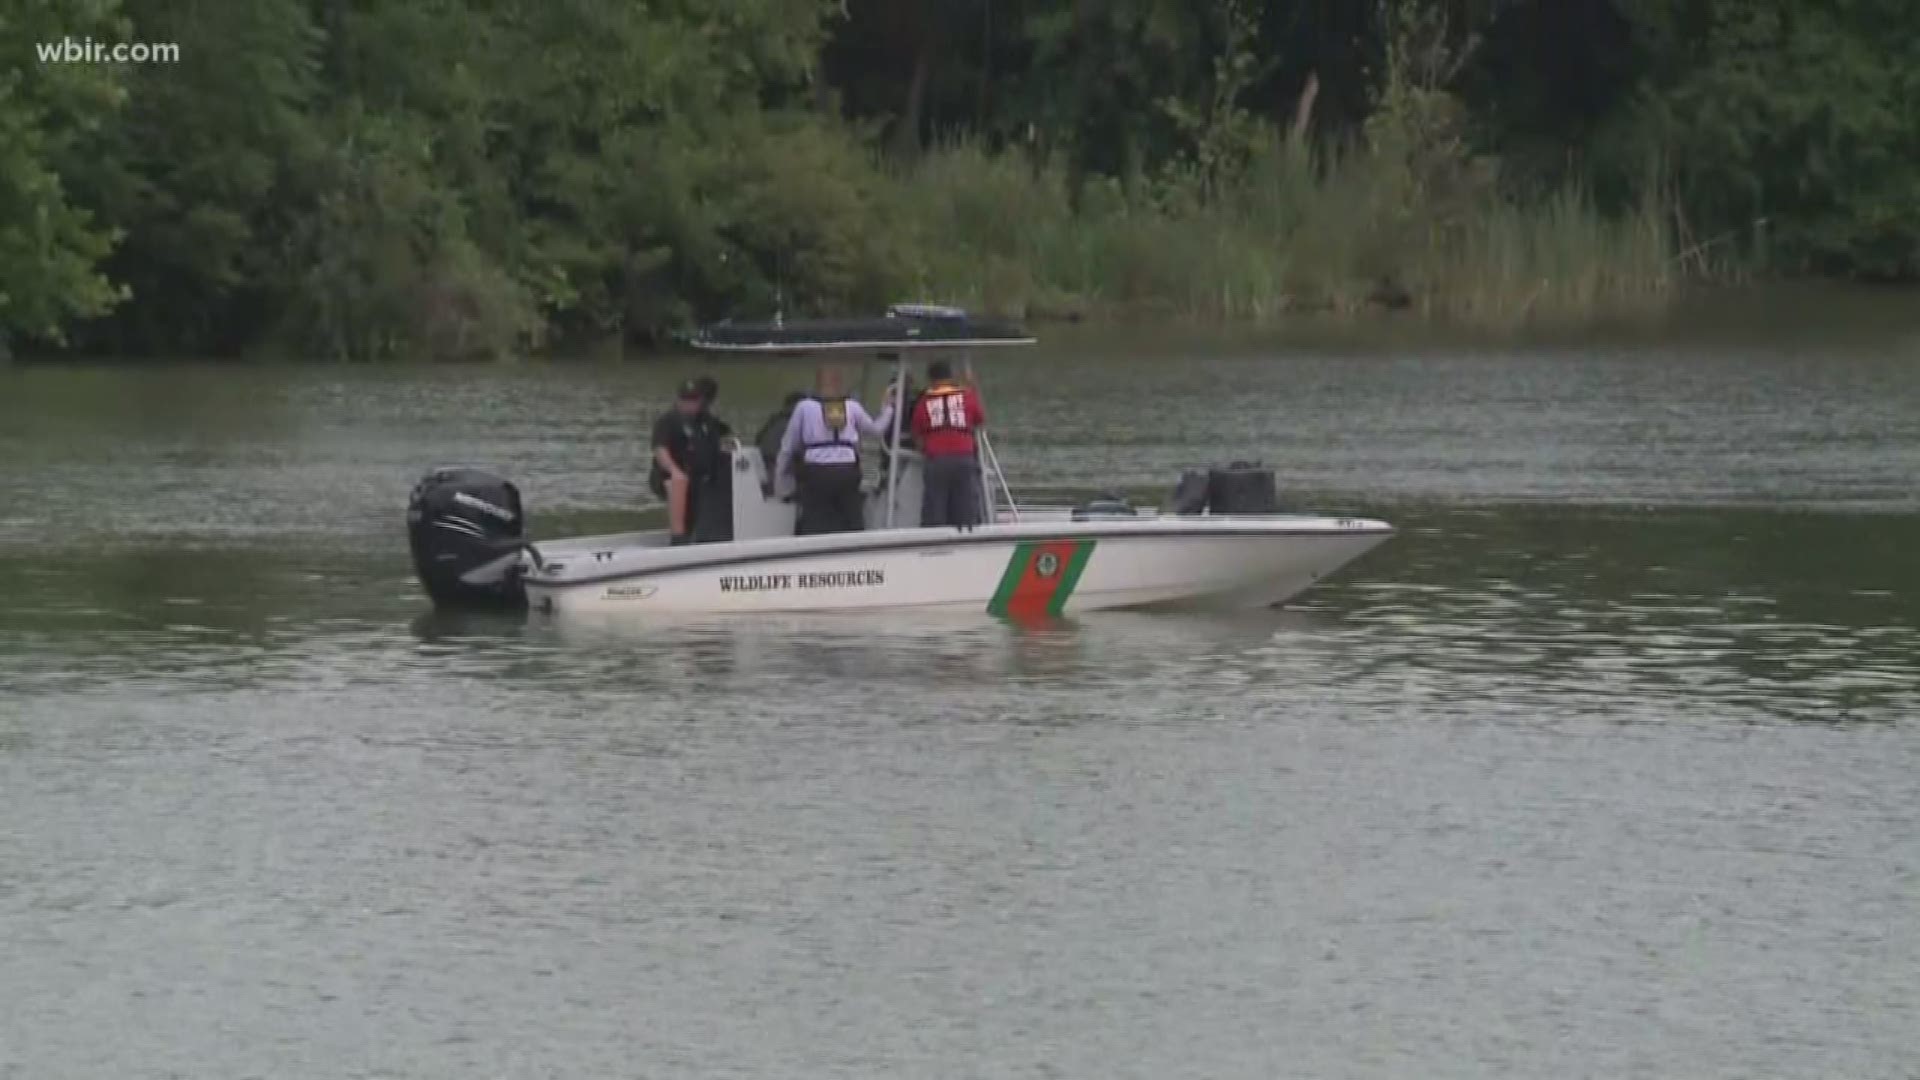 Recovery crews found a small plane that crashed into the Tennessee River near the Downtown Island airport.